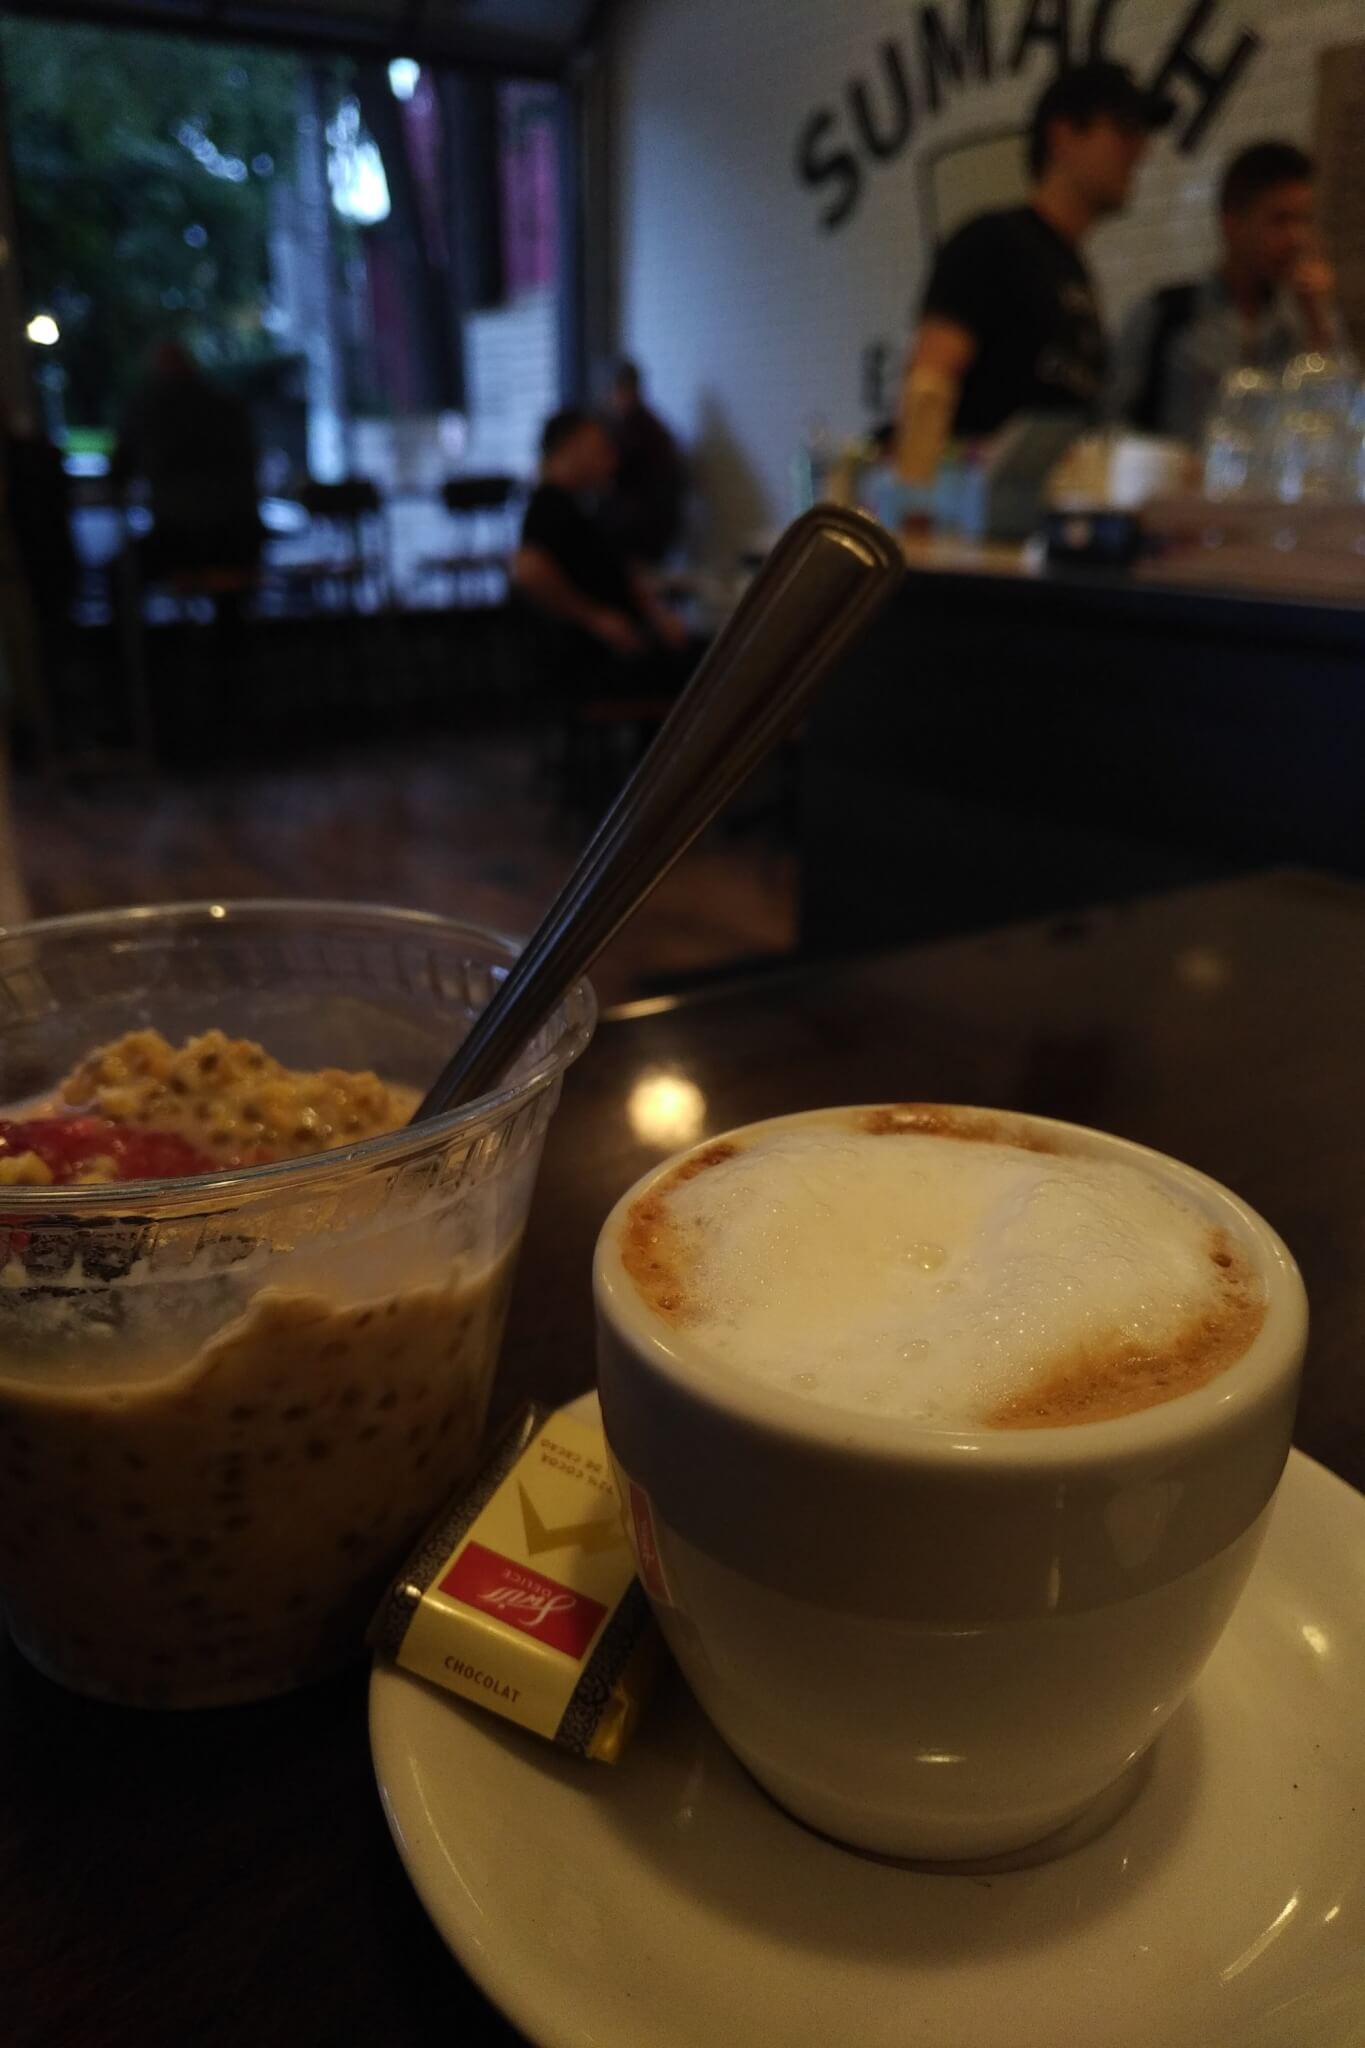 macchiato in single espresso cup with a plastic container of steel cut oatmeal adjacent